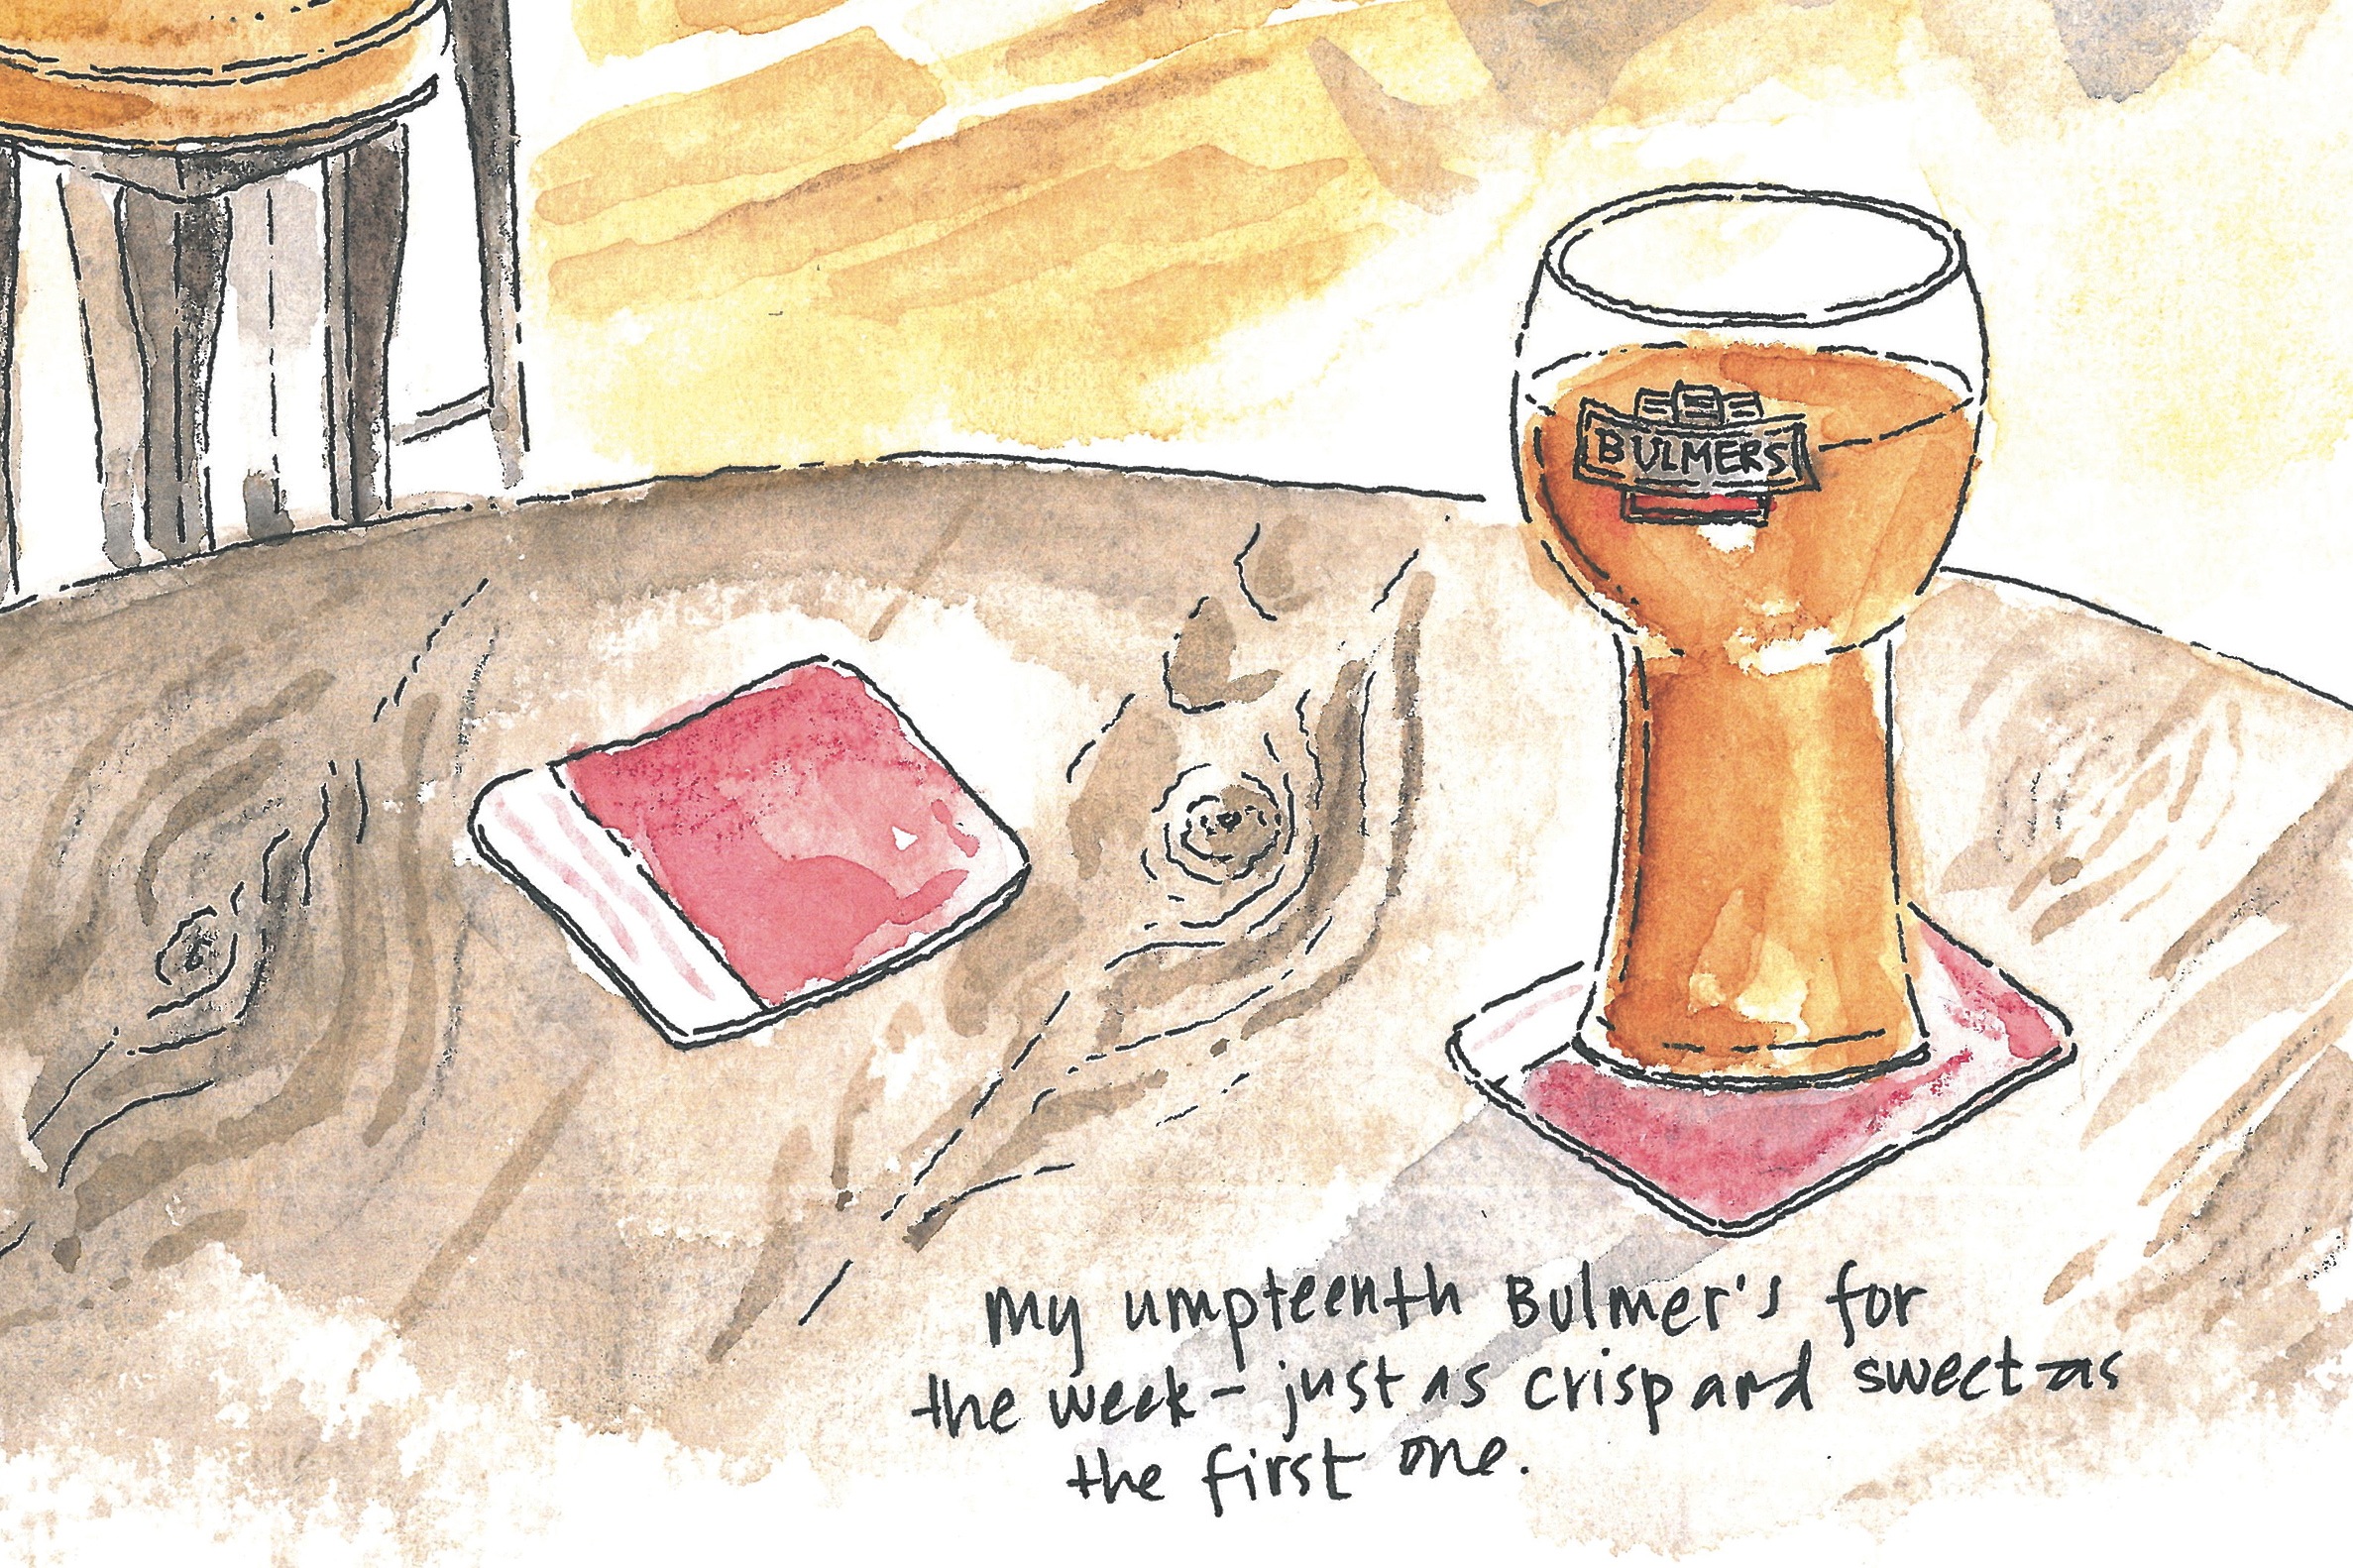 Sketching Ireland: Cider and serendipity in a Dublin pub